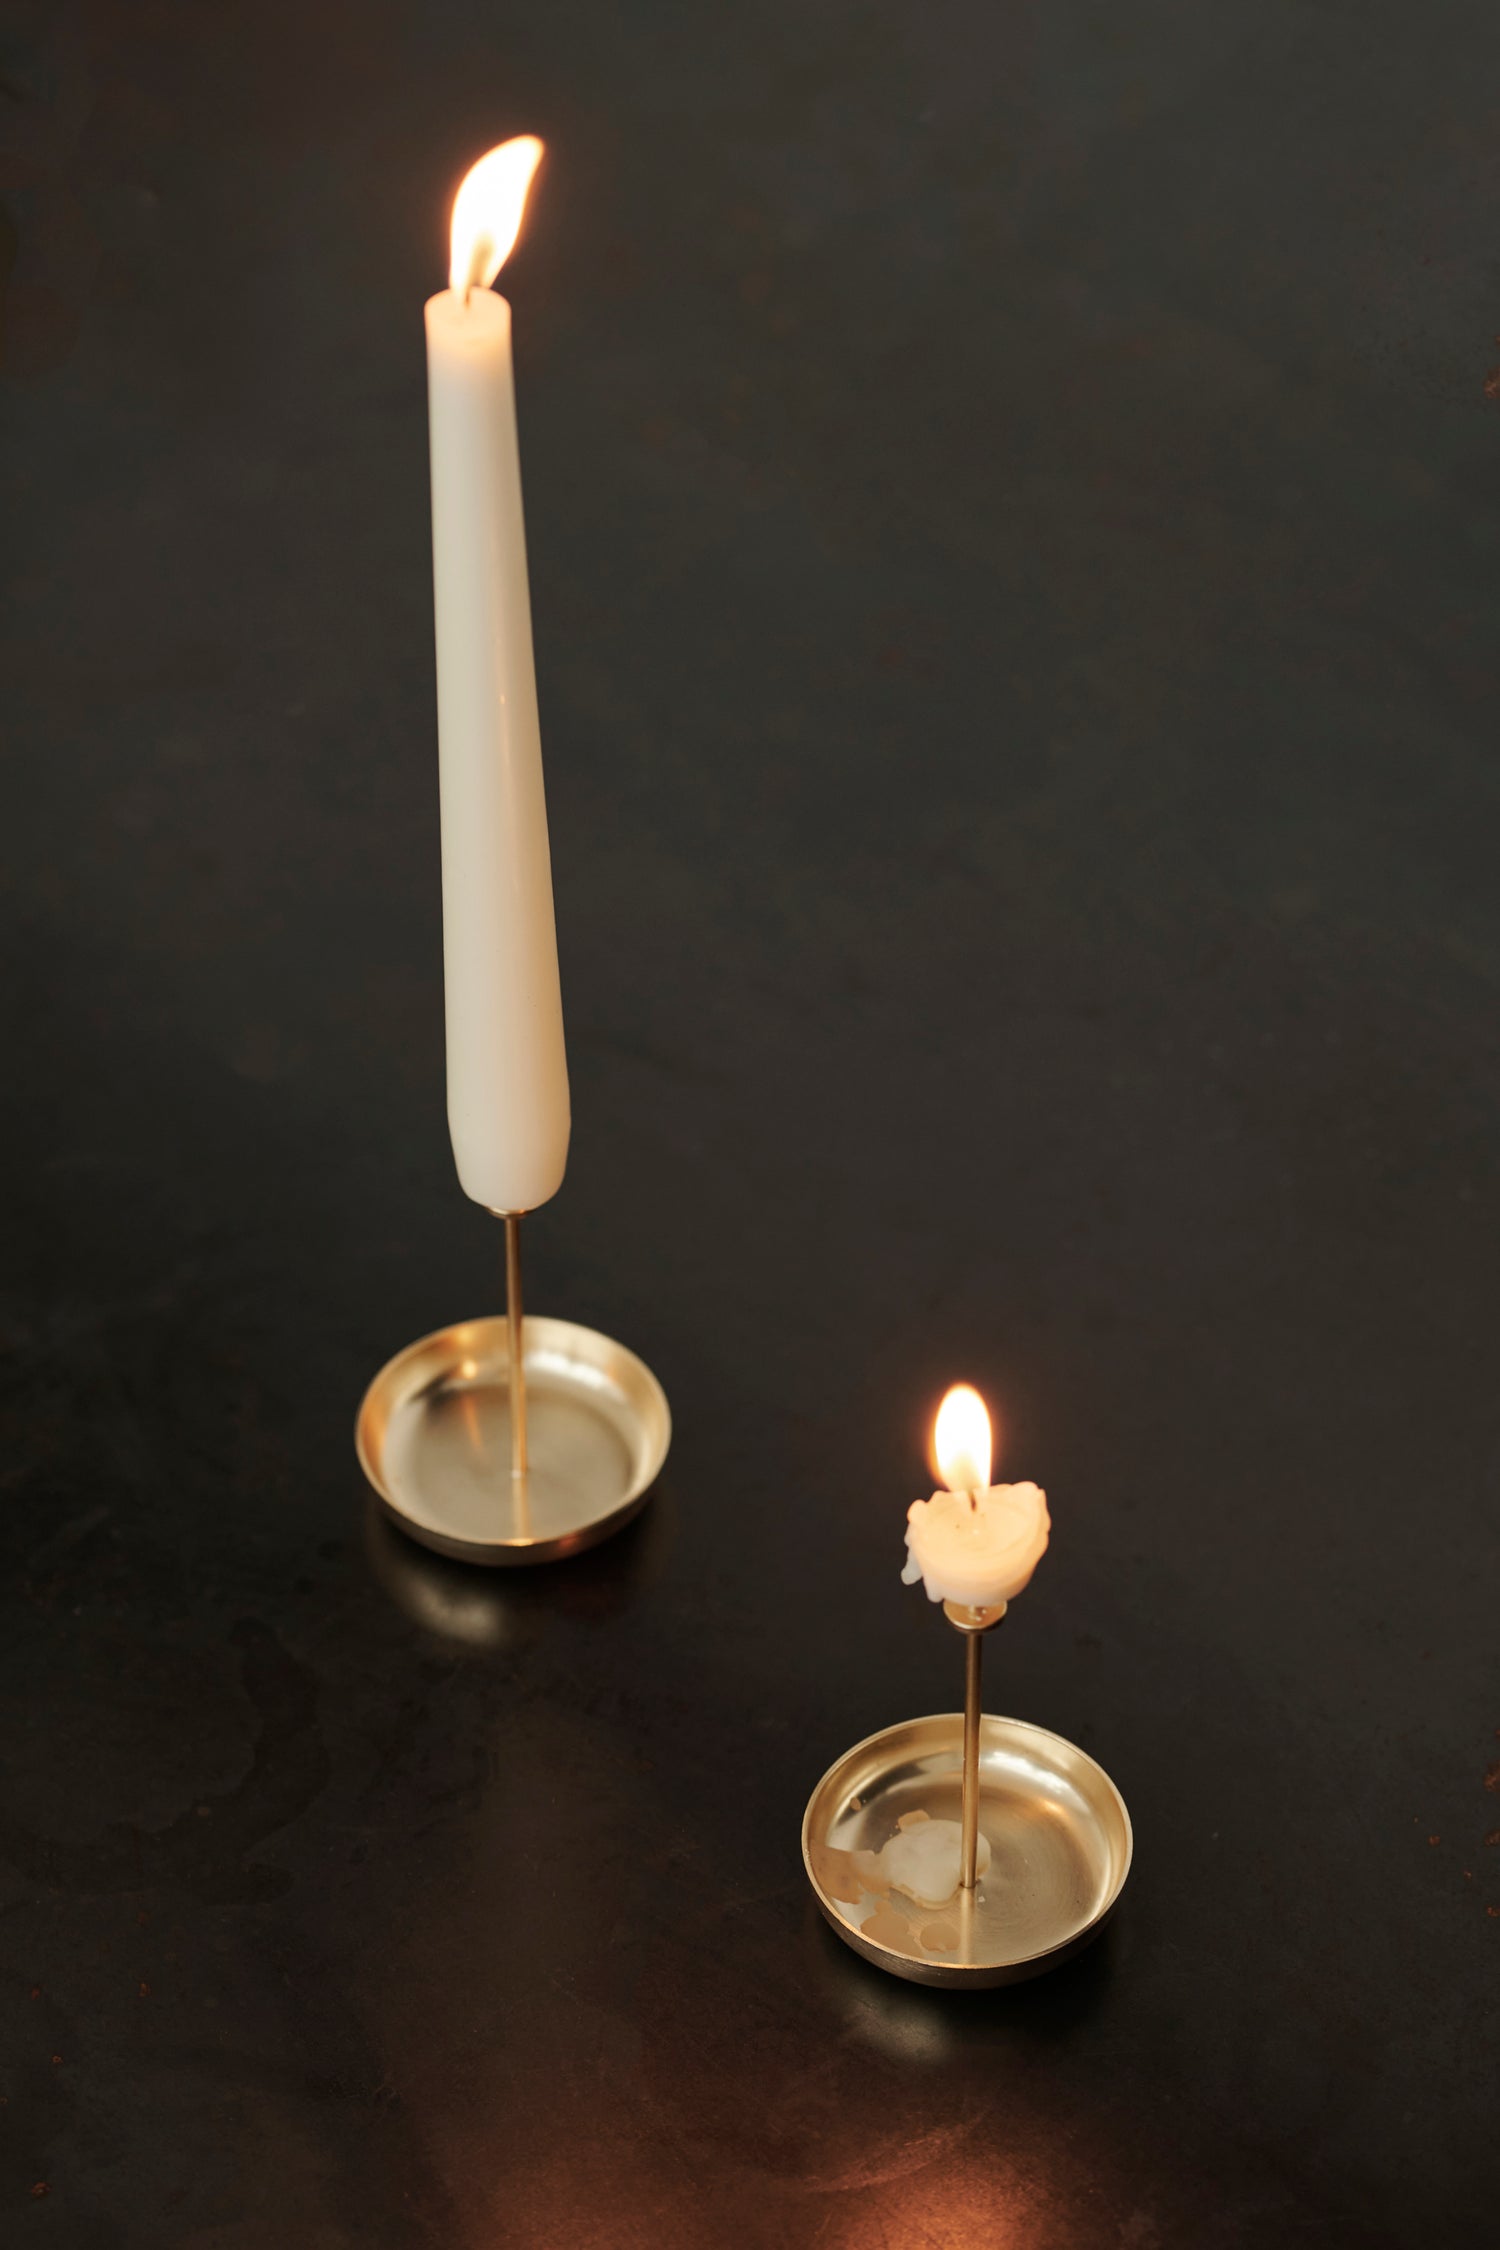 Micro candle pin brass set of 2, elegant and compact accessories for securing small candles. Crafted from brass for a sophisticated touch.